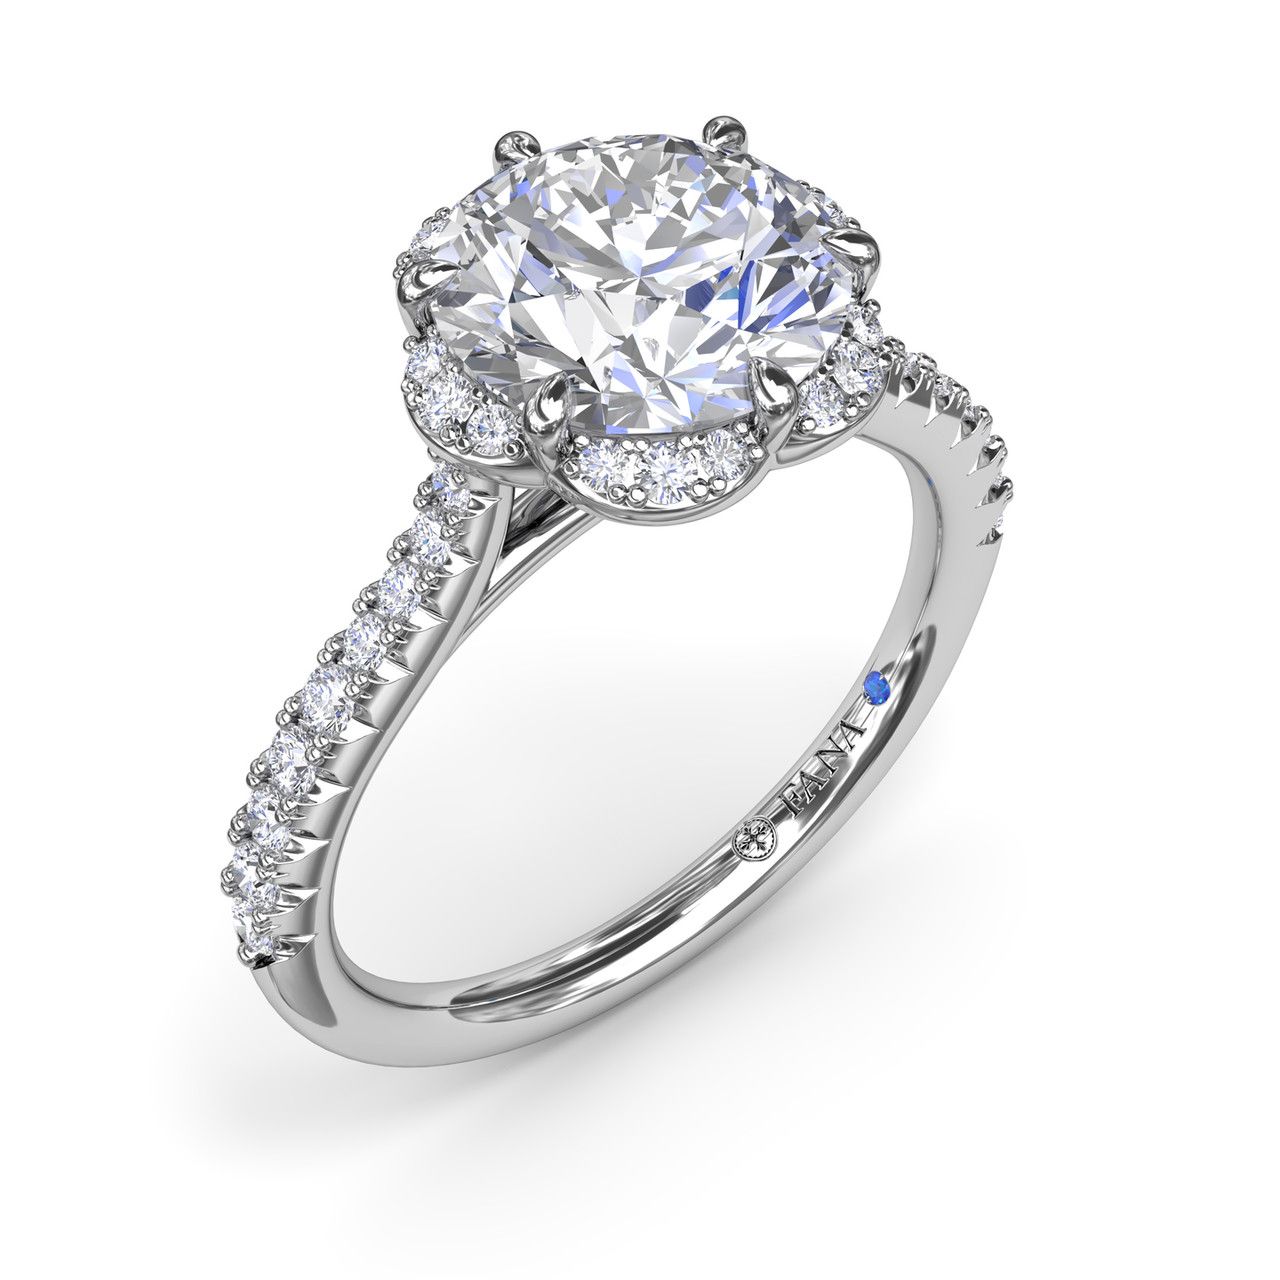 14K WHITE GOLD HALO SEMI-MOUNT RING SIZE 6.5 WITH 60=0.50TW ROUND G-H VS2-SI1 DIAMONDS AND ONE ROUND BLUE SAPPHIRE  (3.49 GRAMS)